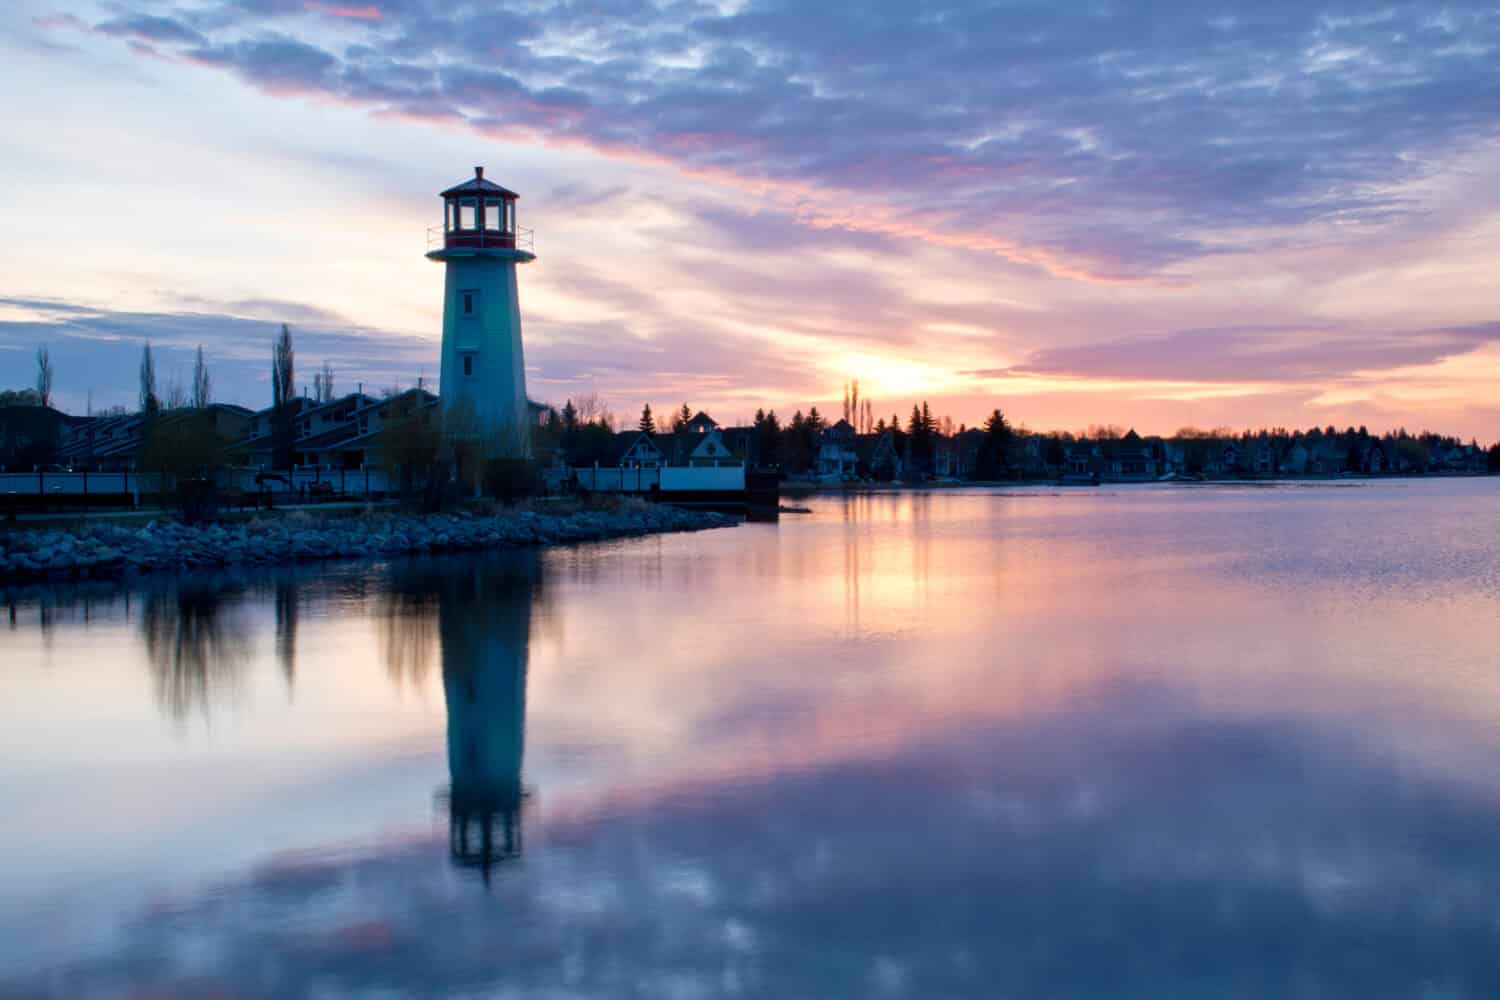  A lighthouse at the shore of Sylvan Lake Community on Alberta, Canada as a symbol of community building. A religious concept of light will reveal anything in darkness.